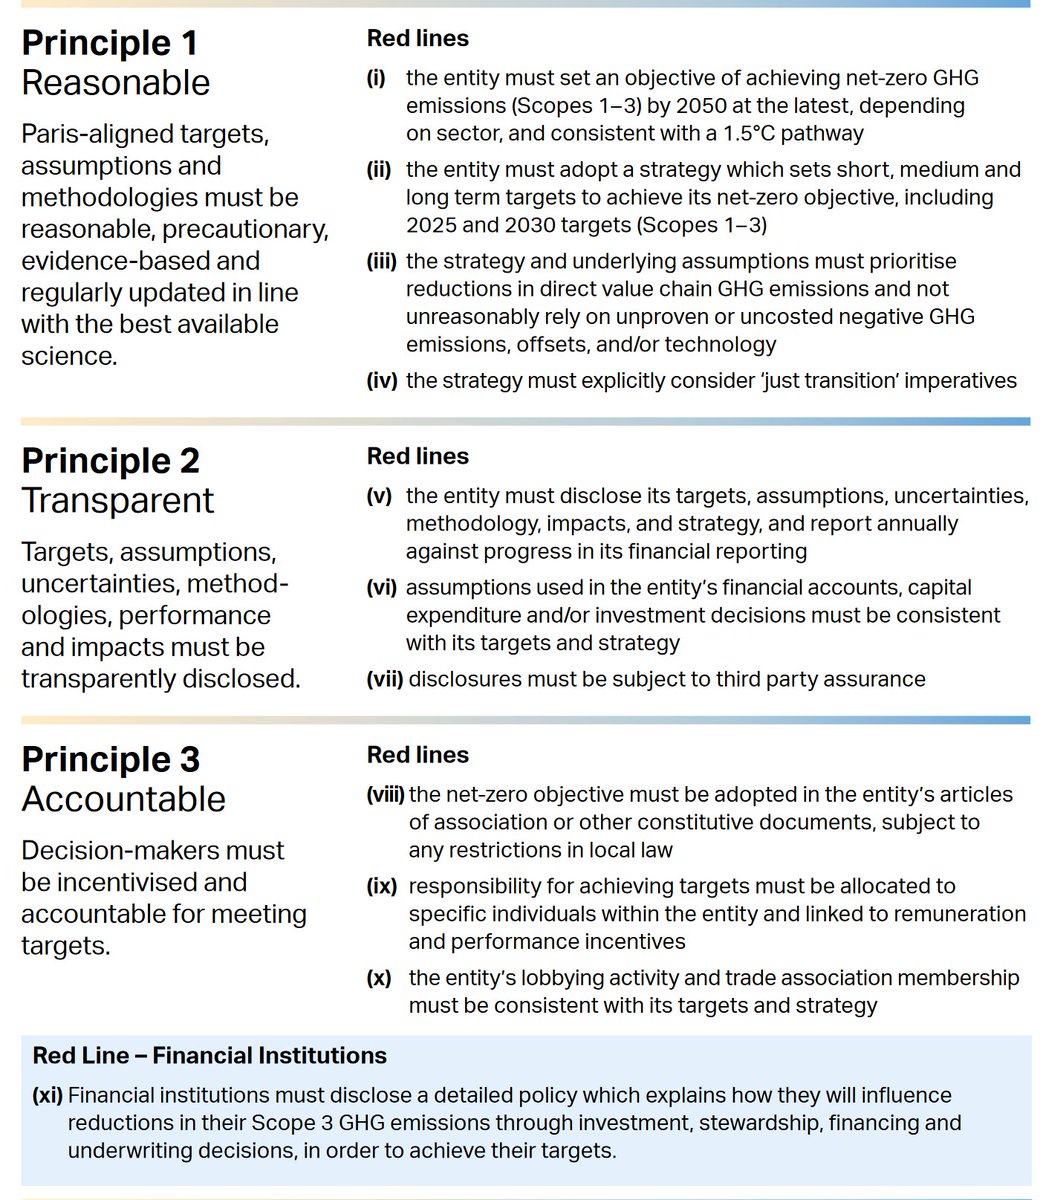 . @ClientEarth has some "Principles for Paris alignment" which are quite clear and, er, principles-based :) There are 3 principles, each with 3-4 "red lines":  https://www.clientearth.org/media/40omeroa/2020-10-16-principles-for-paris-alignment-position-paper-ce-en.pdf